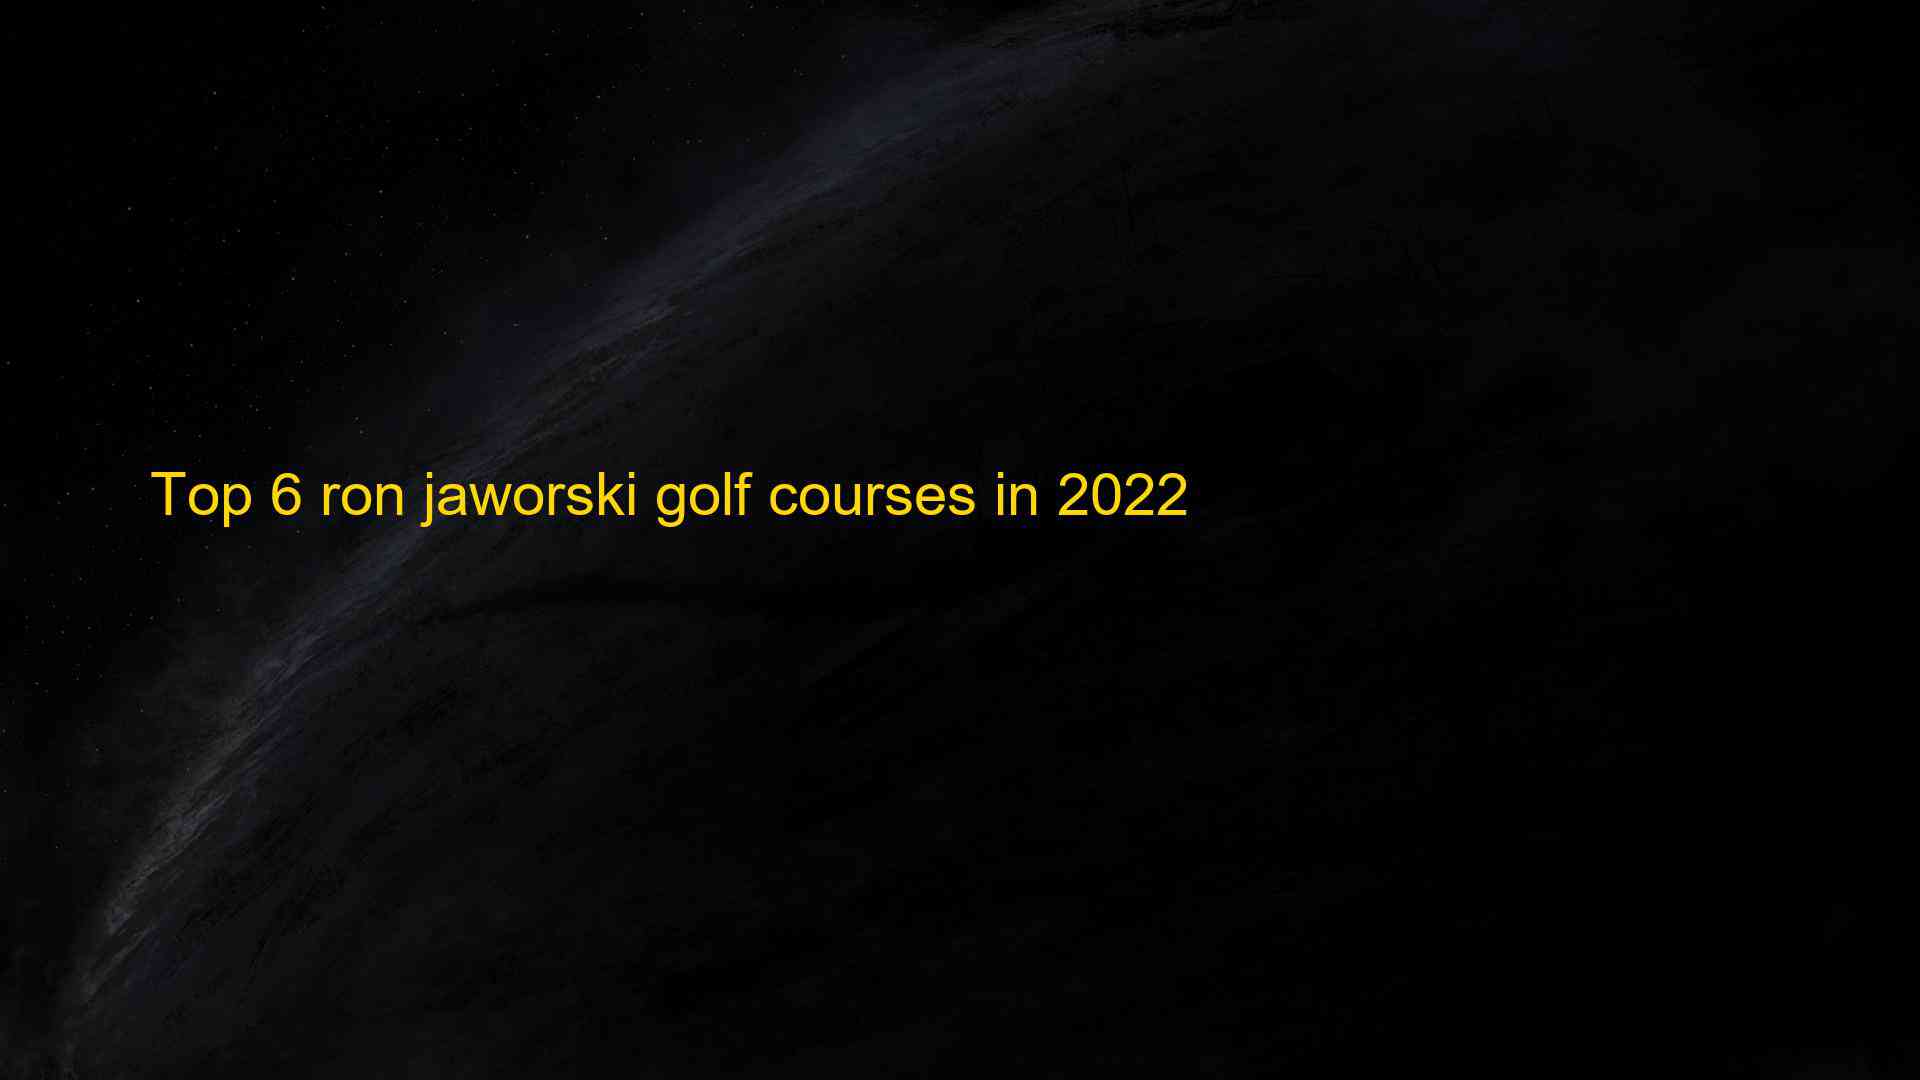 Top 6 ron jaworski golf courses in 2022 1660795344